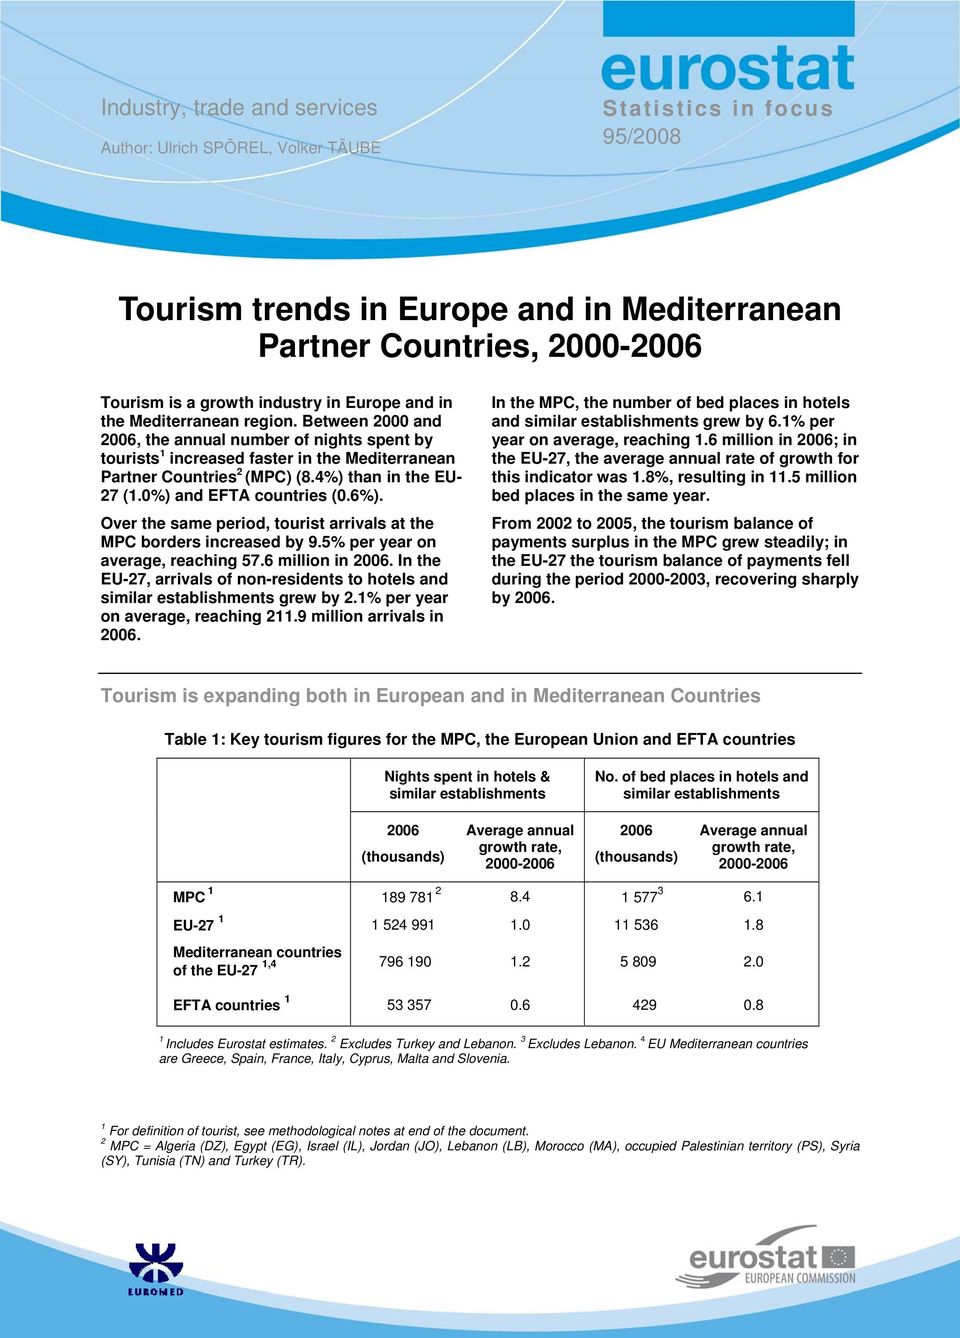 %) and EFTA countries (.6%). Over the same period, tourist arrivals at the MPC borders increased by 9.5% per year on average, reaching 57.6 million in 26.